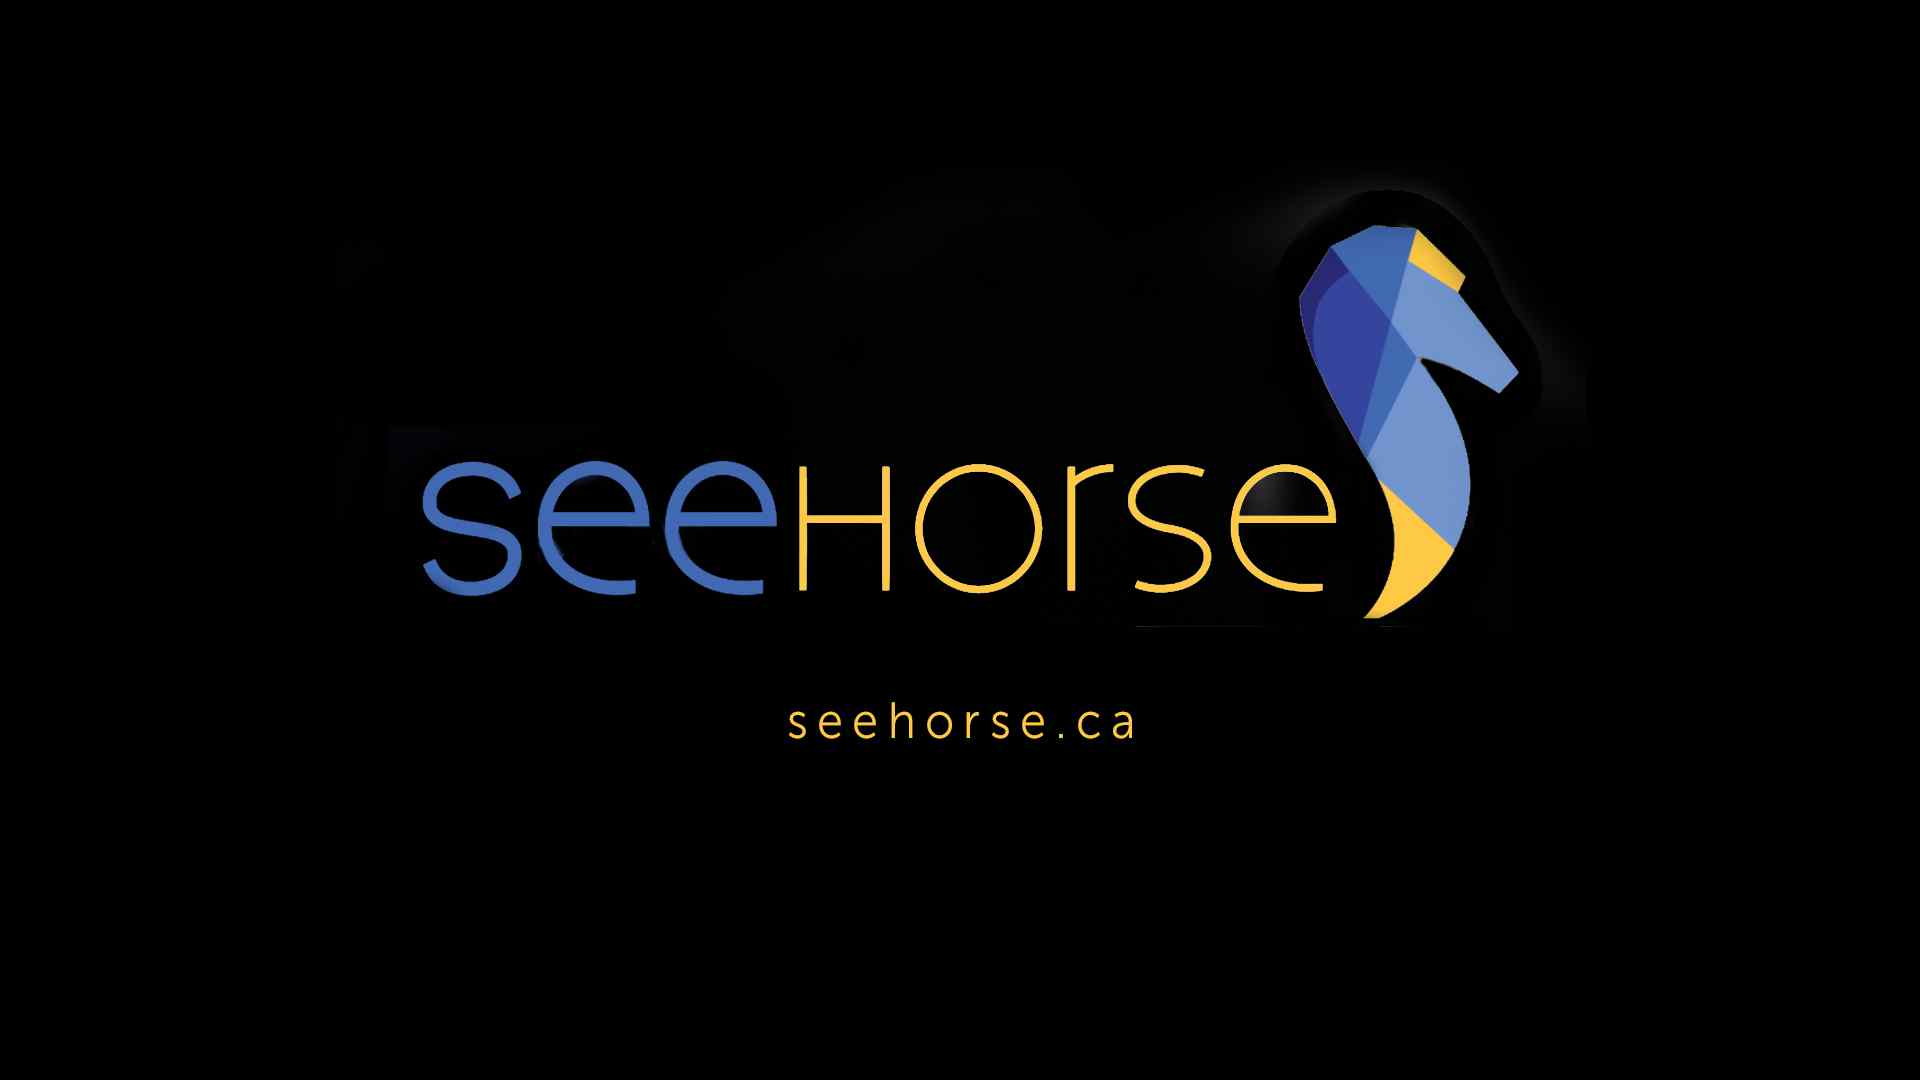 SeeHorse - A Wearable Designed for the Equestrian Market